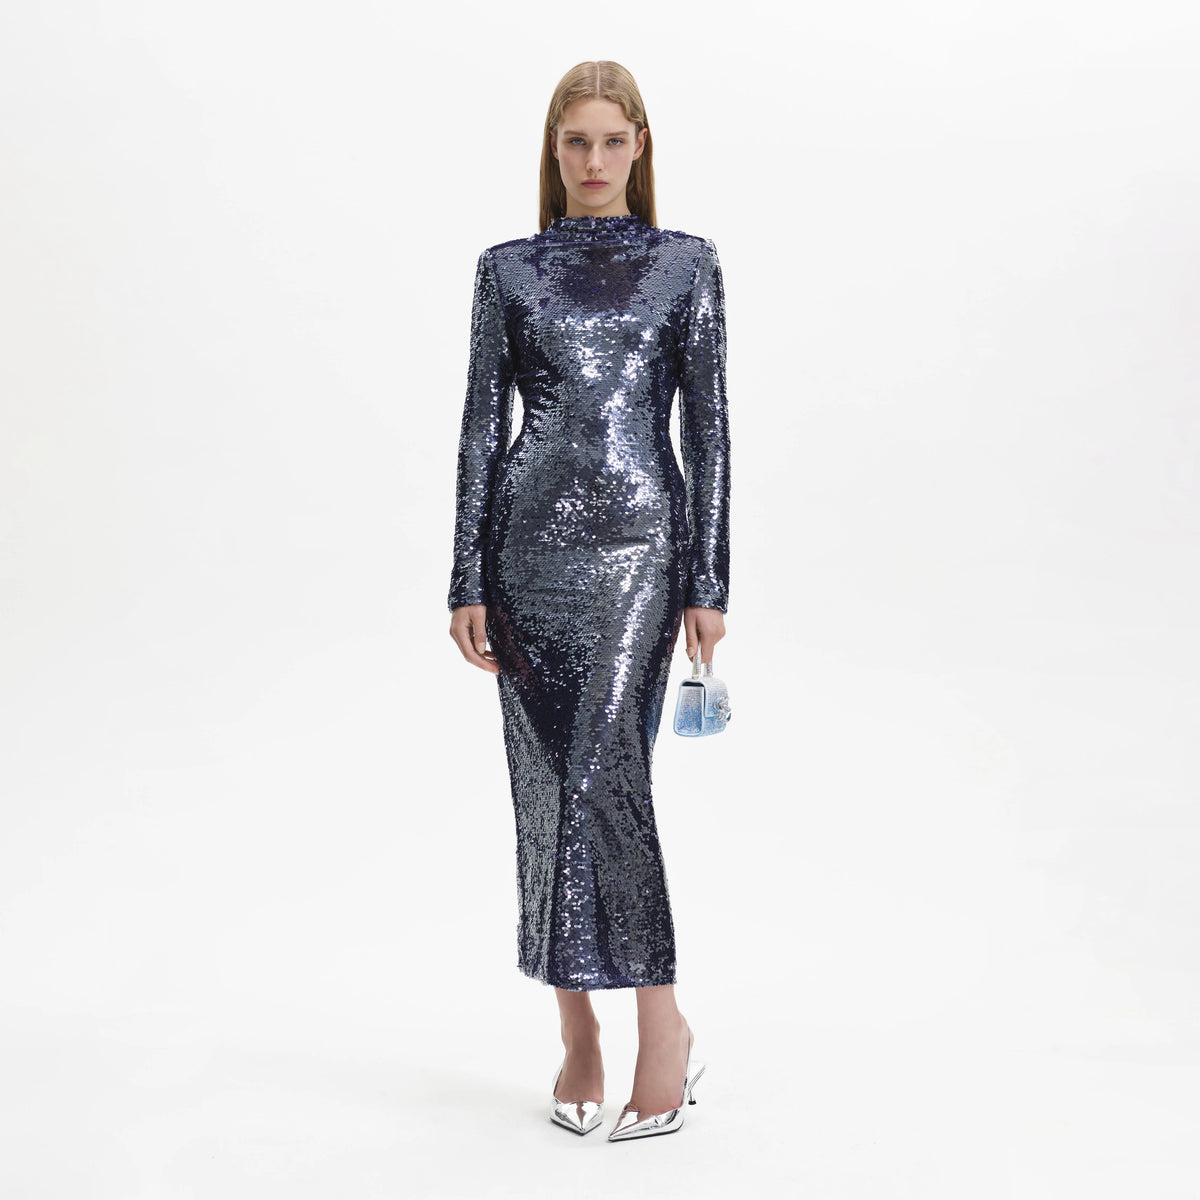 Blue sequin midi dress with long sleeves and high cowl neck